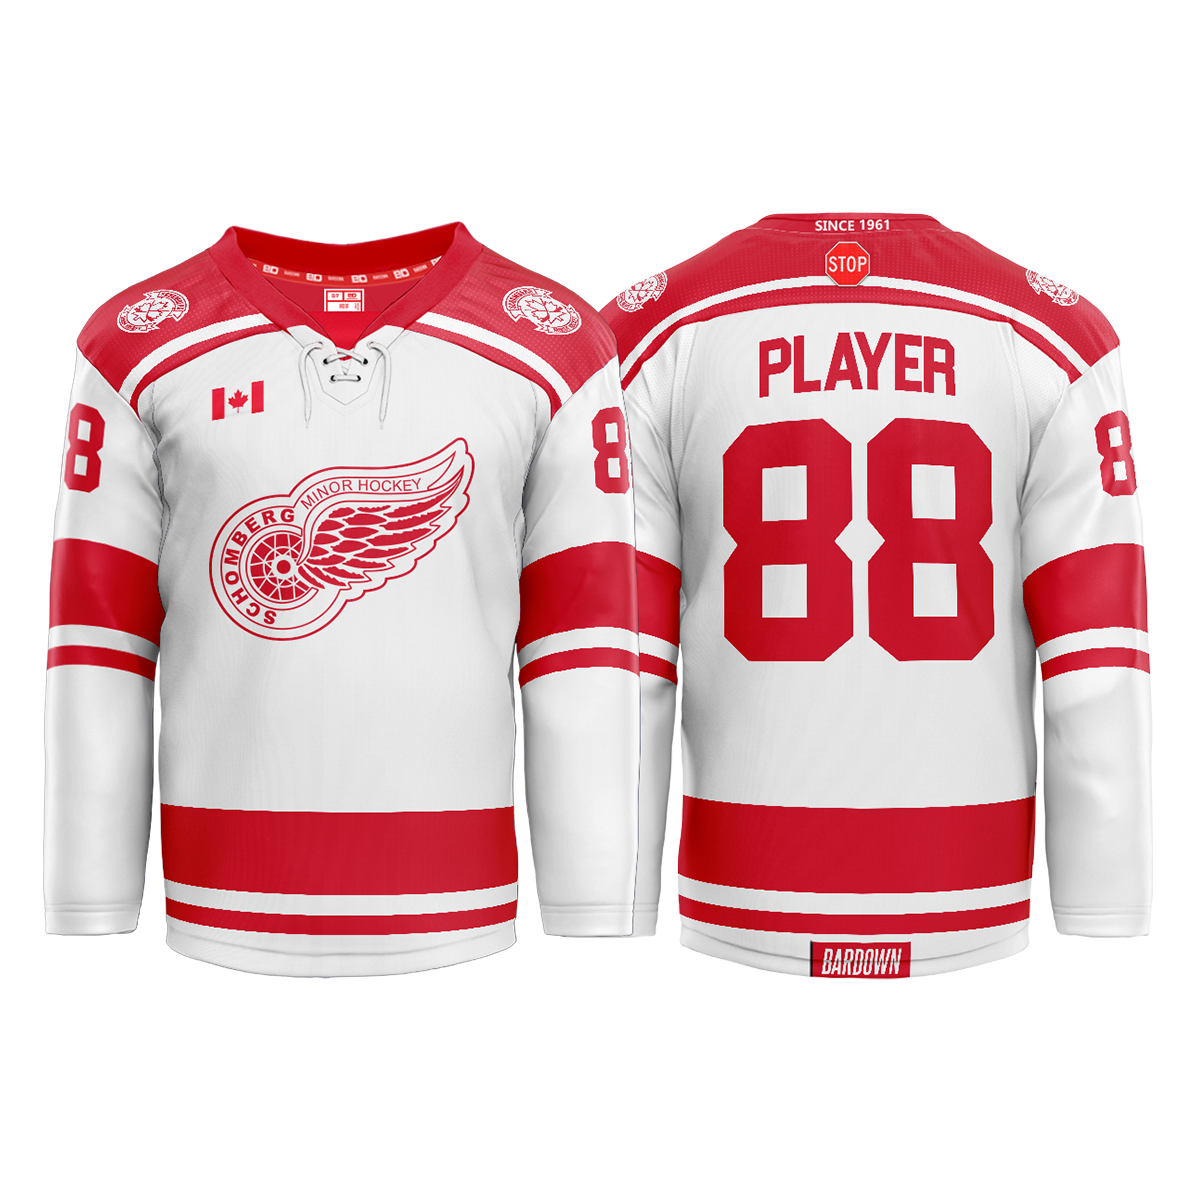 Schomberg Red Wings Team Jerseys 2023 (2 Pack)